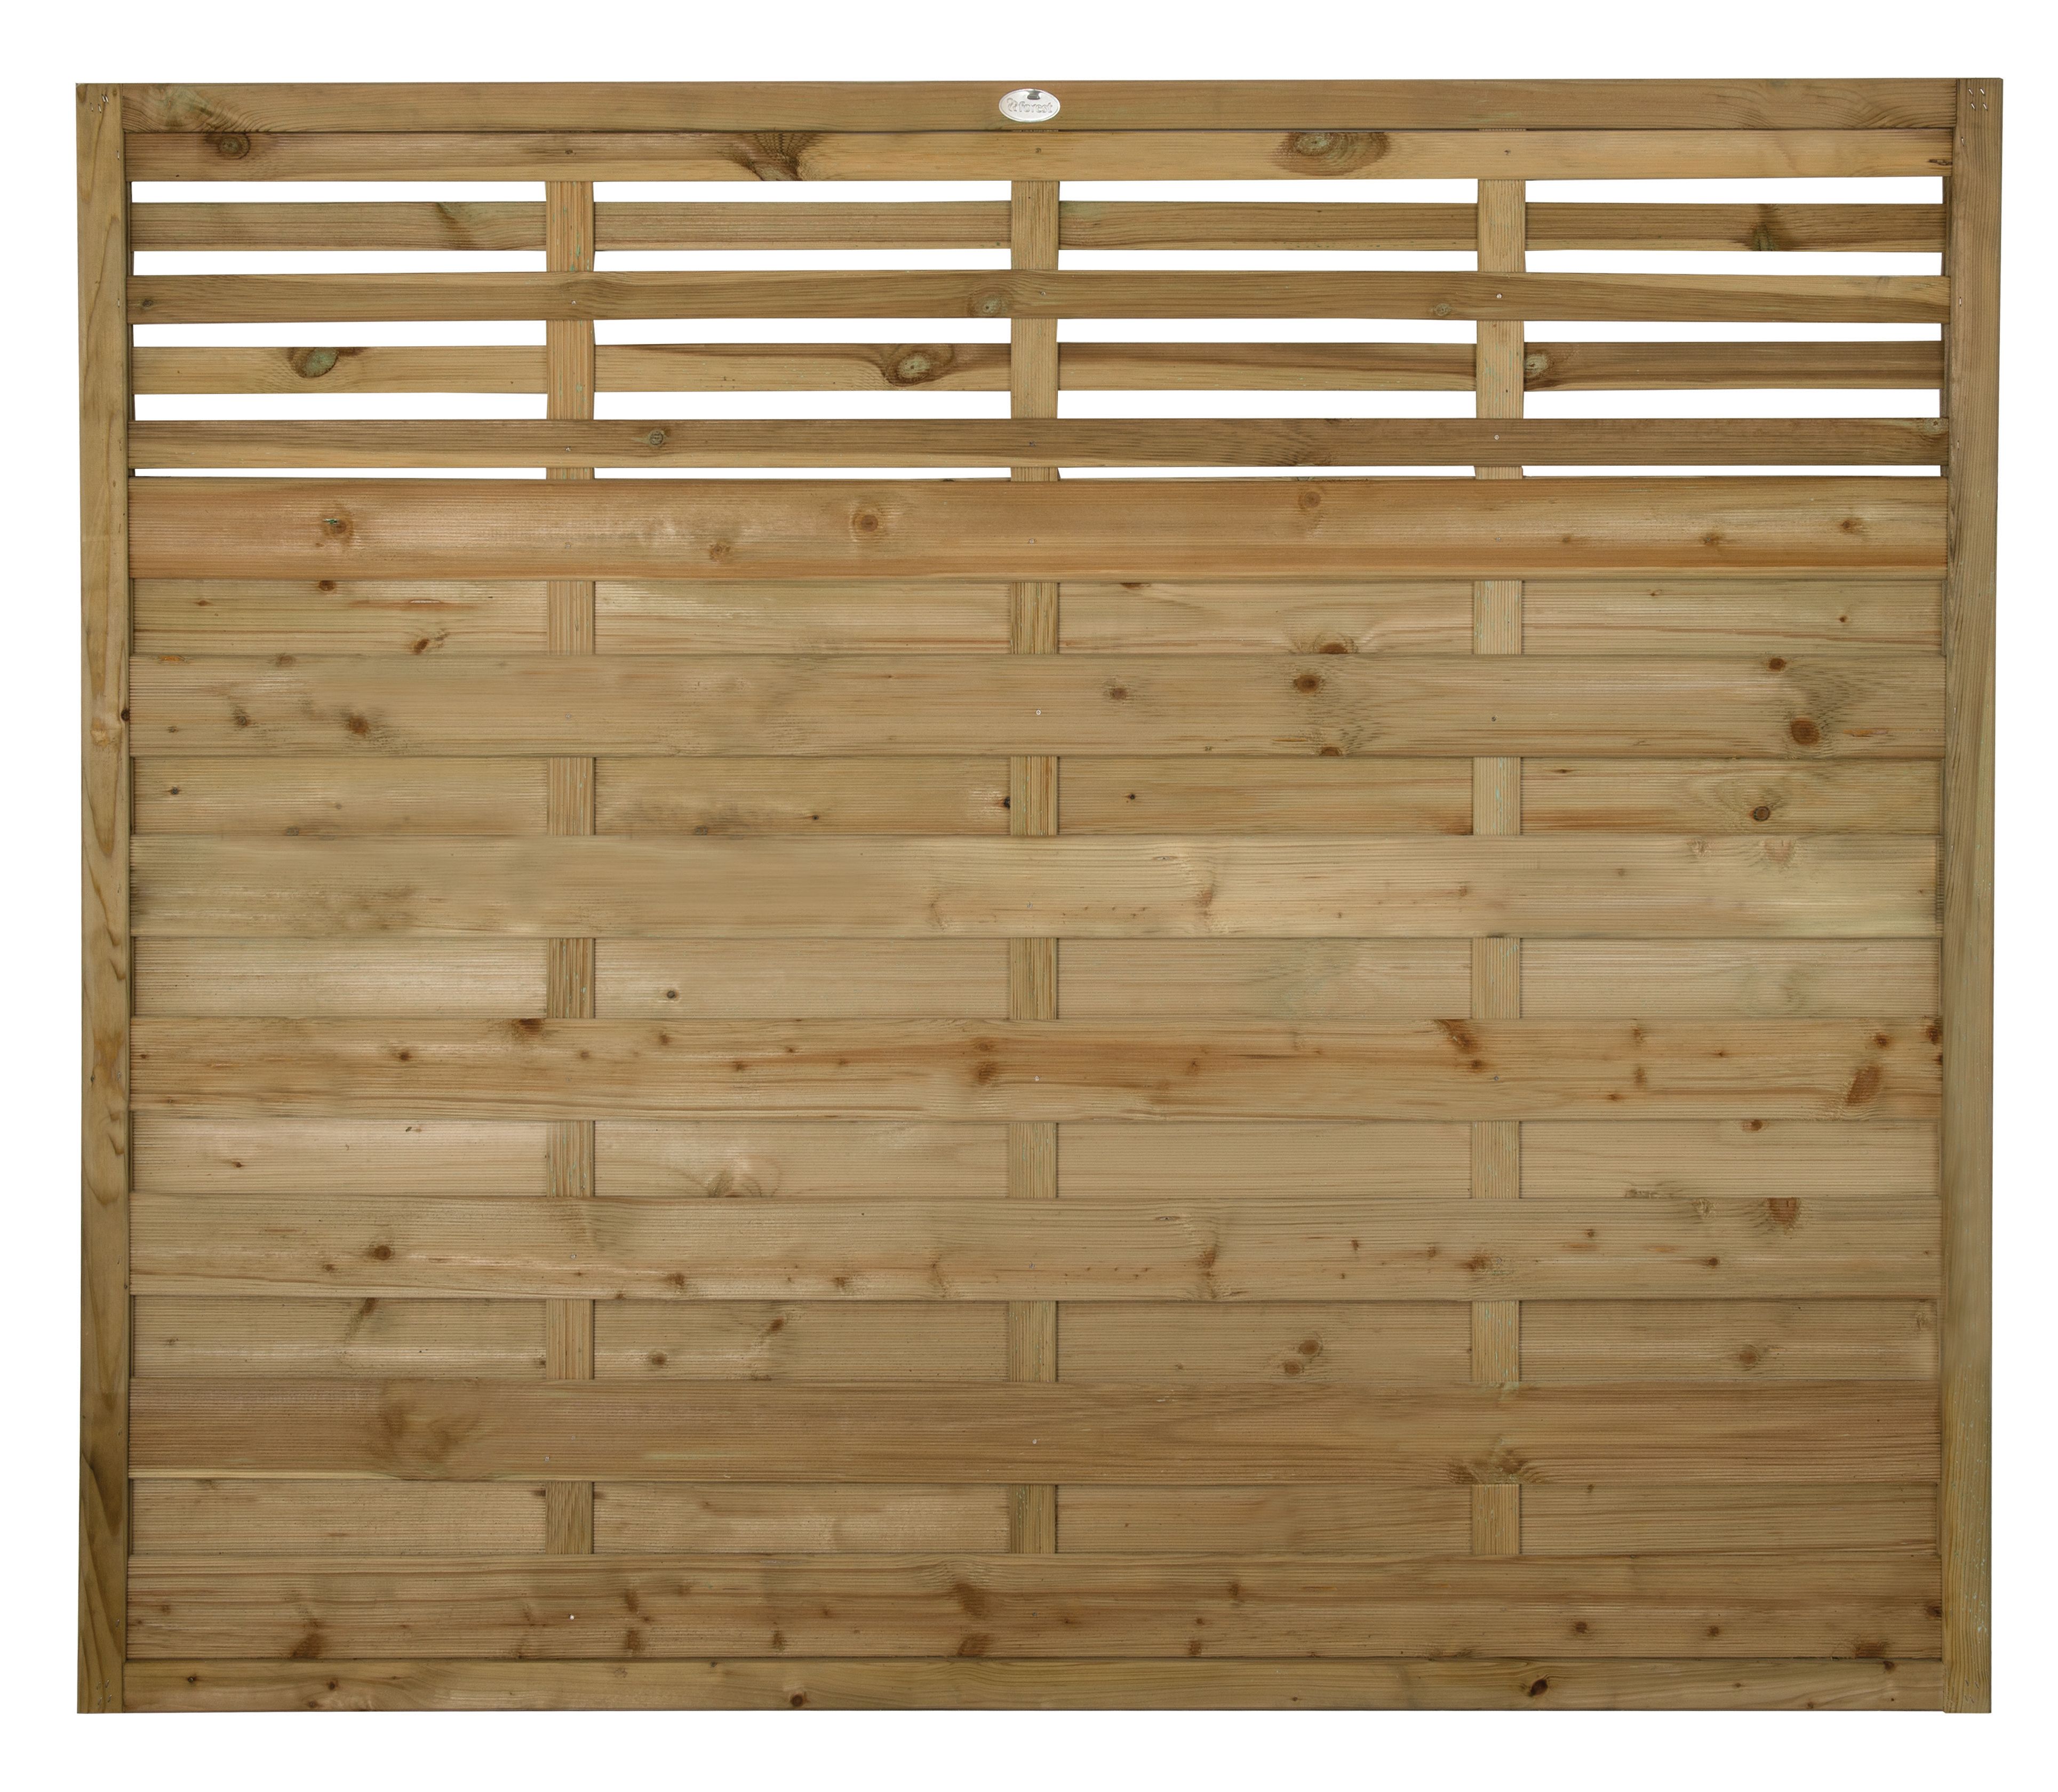 Image of Forest Garden Pressure Treated Kyoto Fence Panel - 1800 x 1500mm - 6 x 5ft - Pack of 4